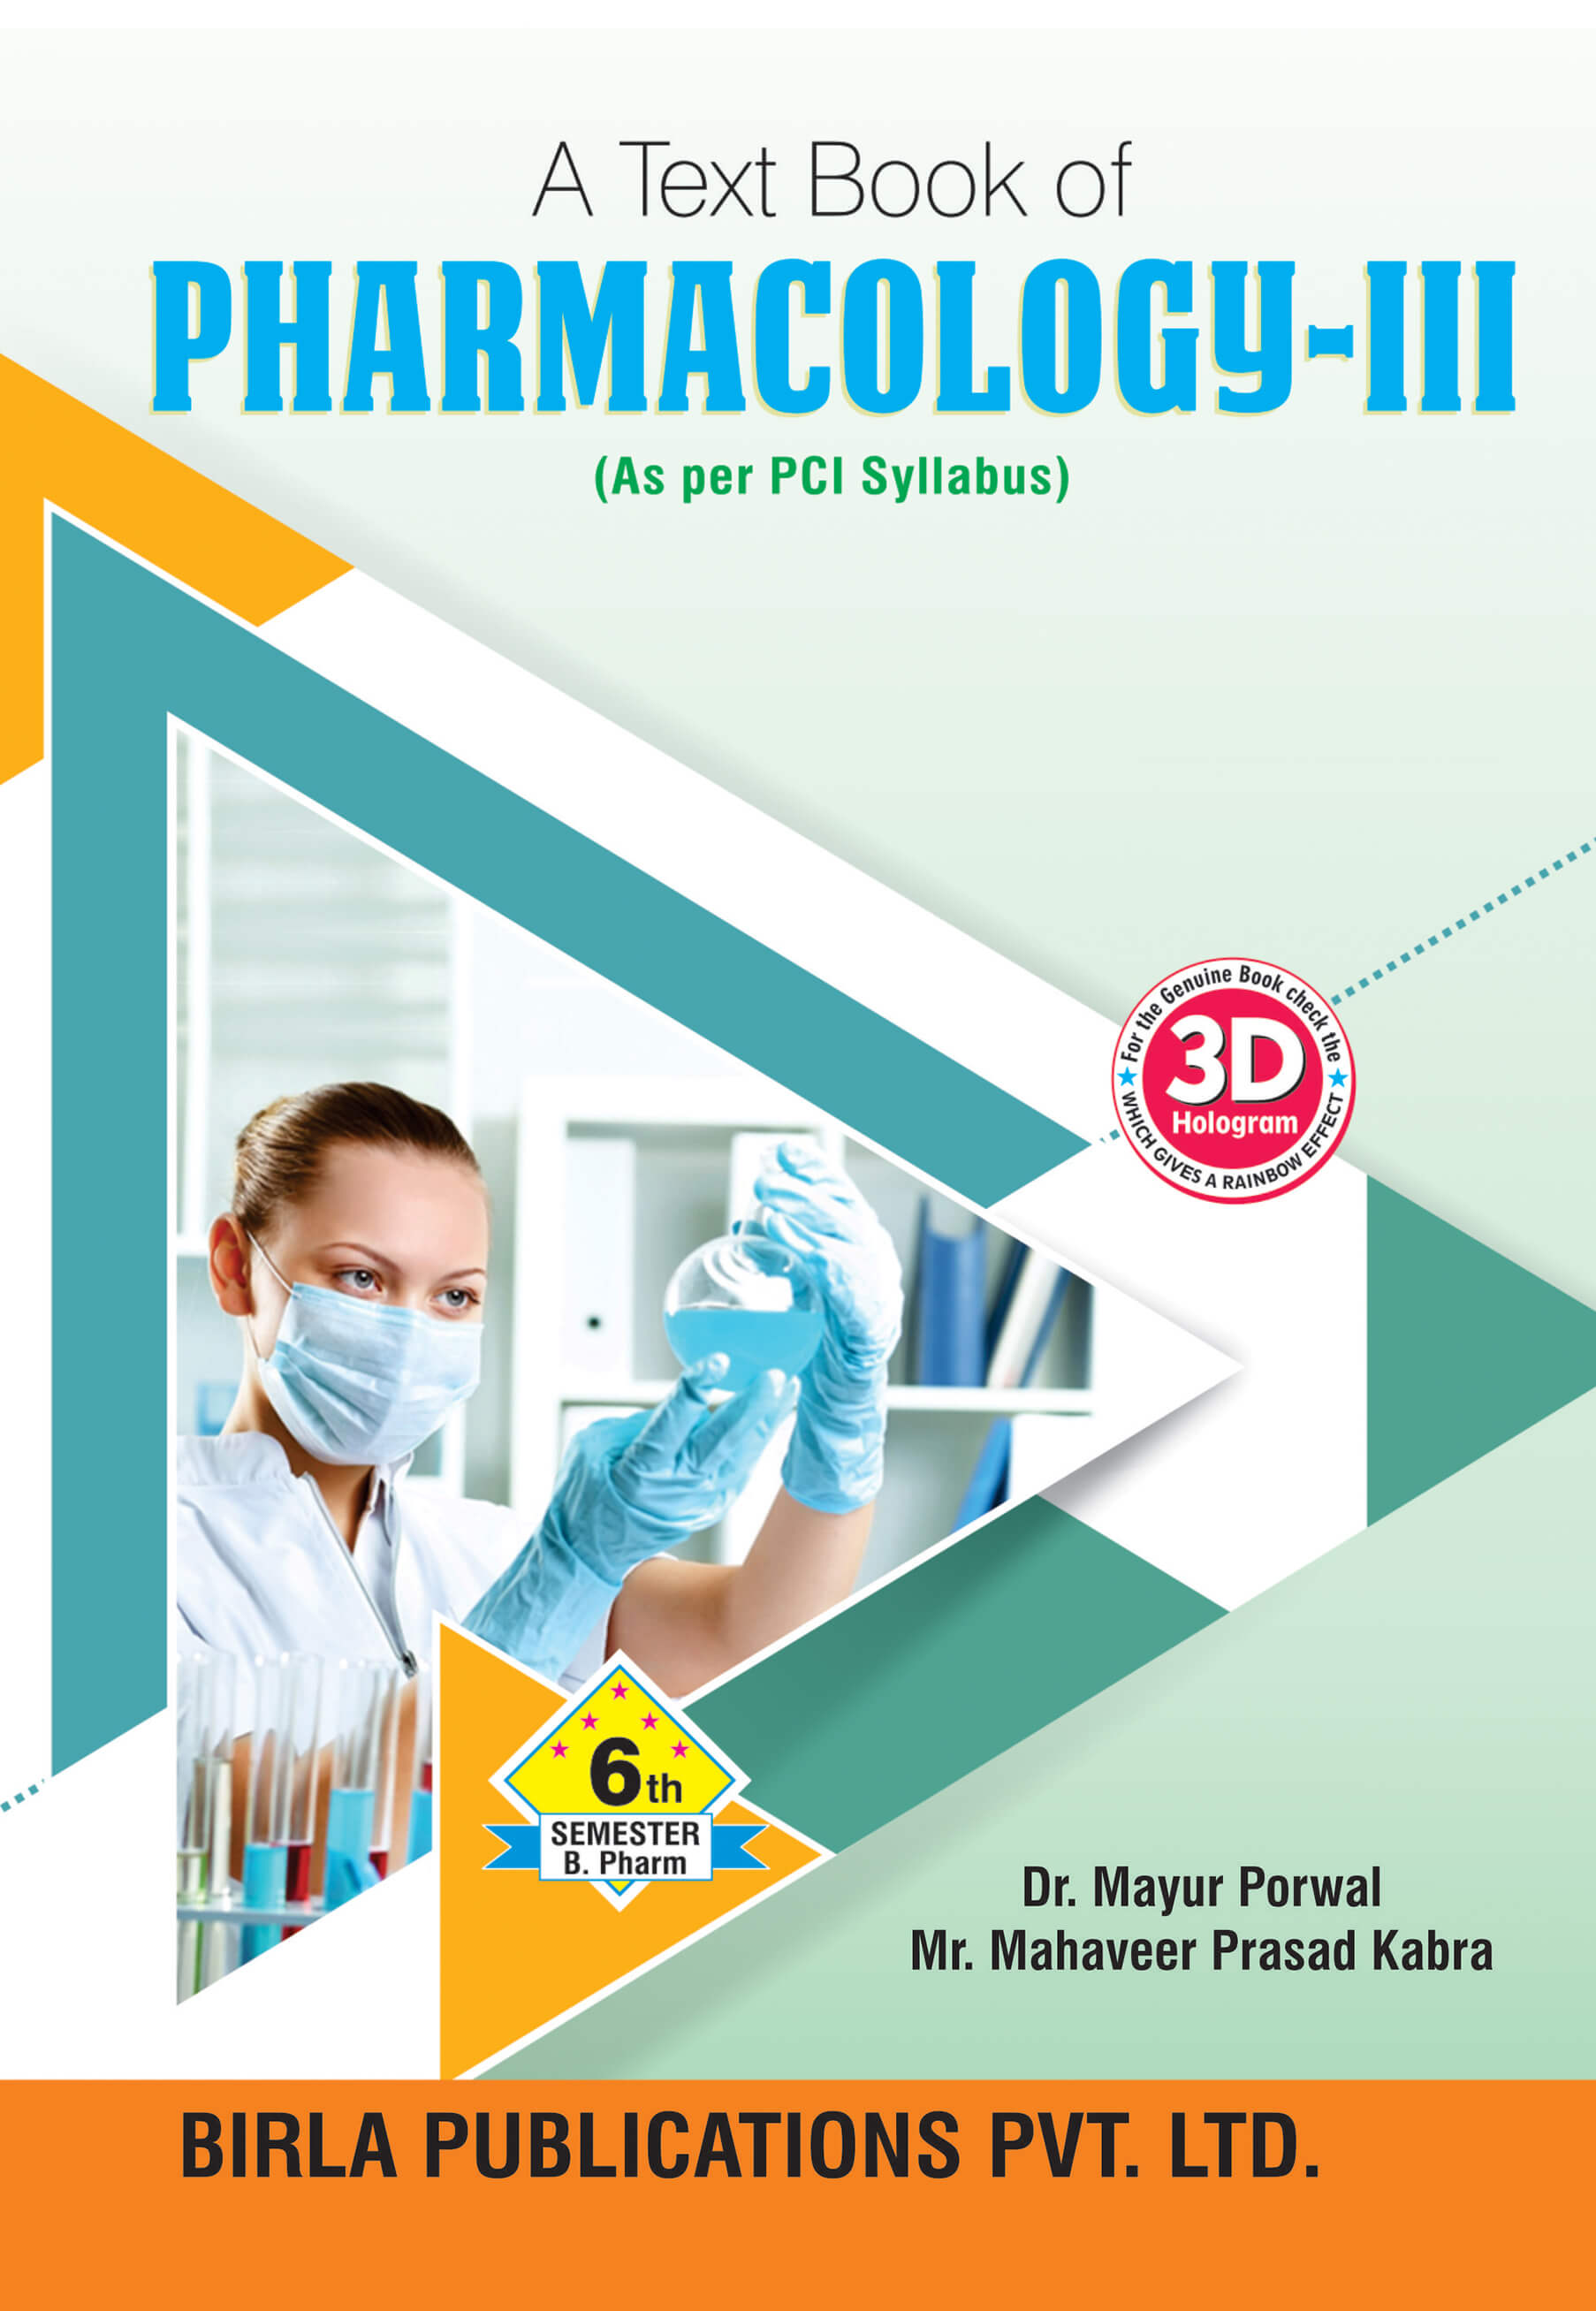 A TEXT BOOK OF PHARMACOLOGY-III